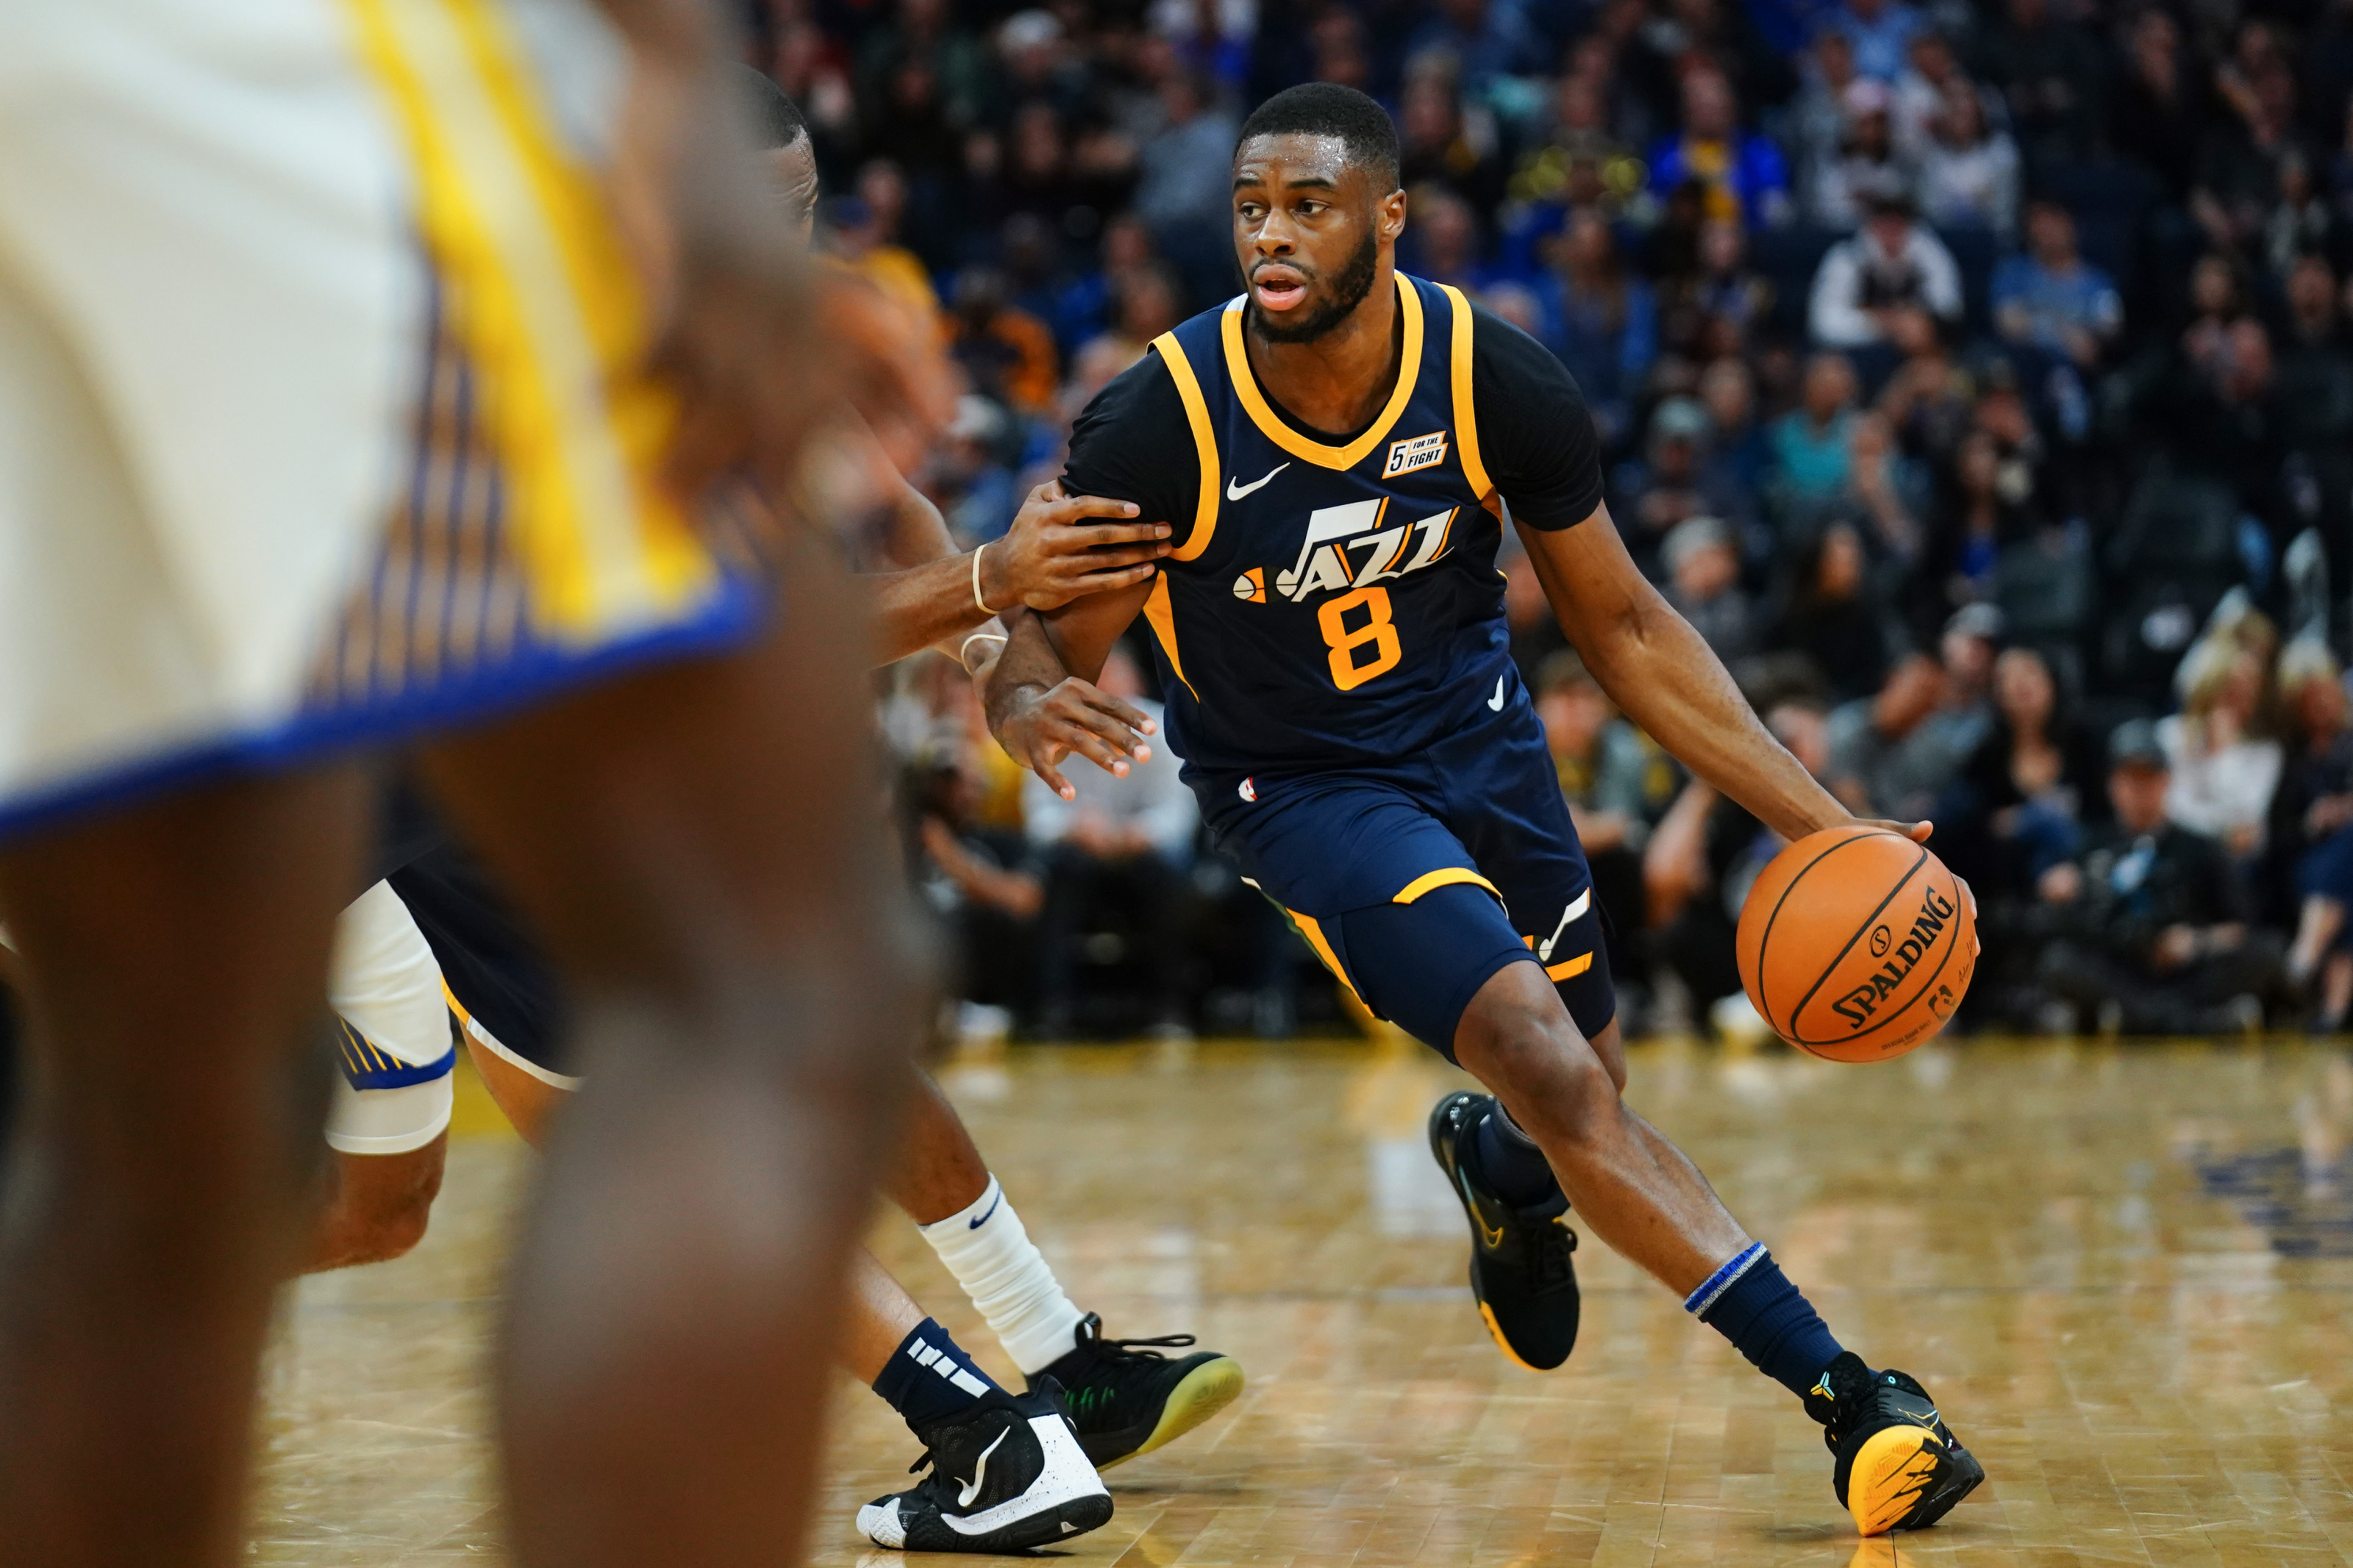 Jordan Clarkson is ready for the return of Donovan Mitchell: 'He's